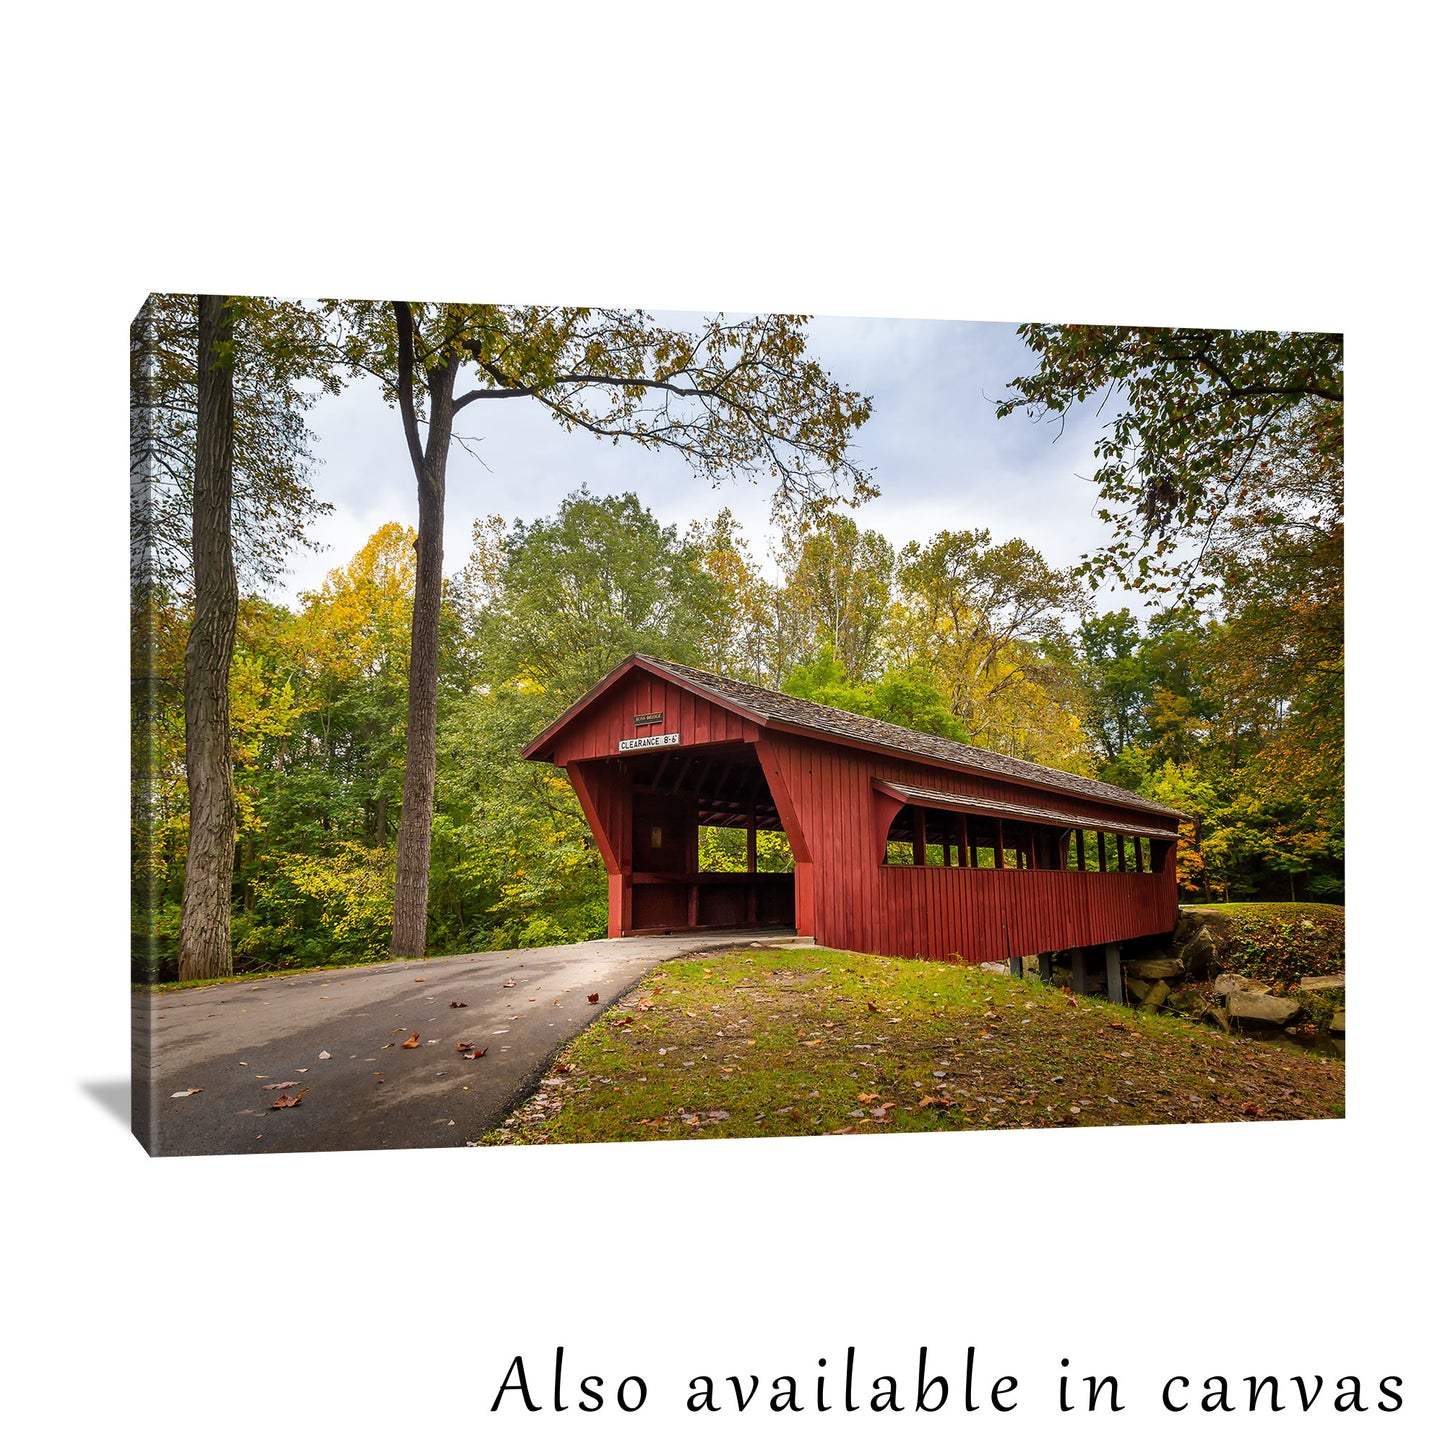 The photograph is beautifully presented on a gallery-wrapped canvas, showing this photograph is also available as a canvas print for those interested in a ready-to-hang solution.